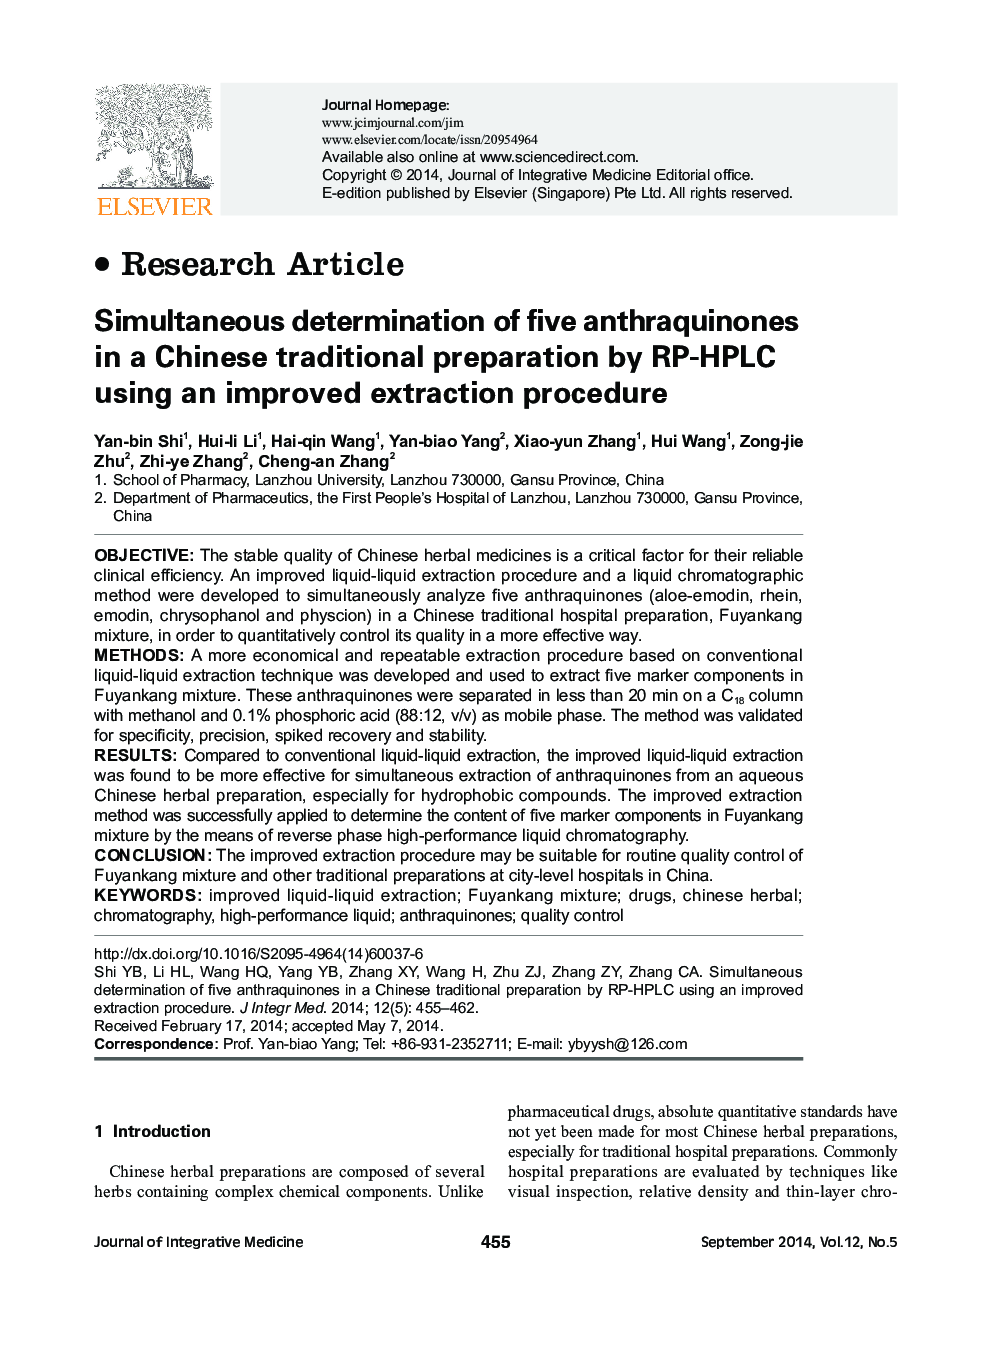 Simultaneous determination of five anthraquinones in a Chinese traditional preparation by RP-HPLC using an improved extraction procedure